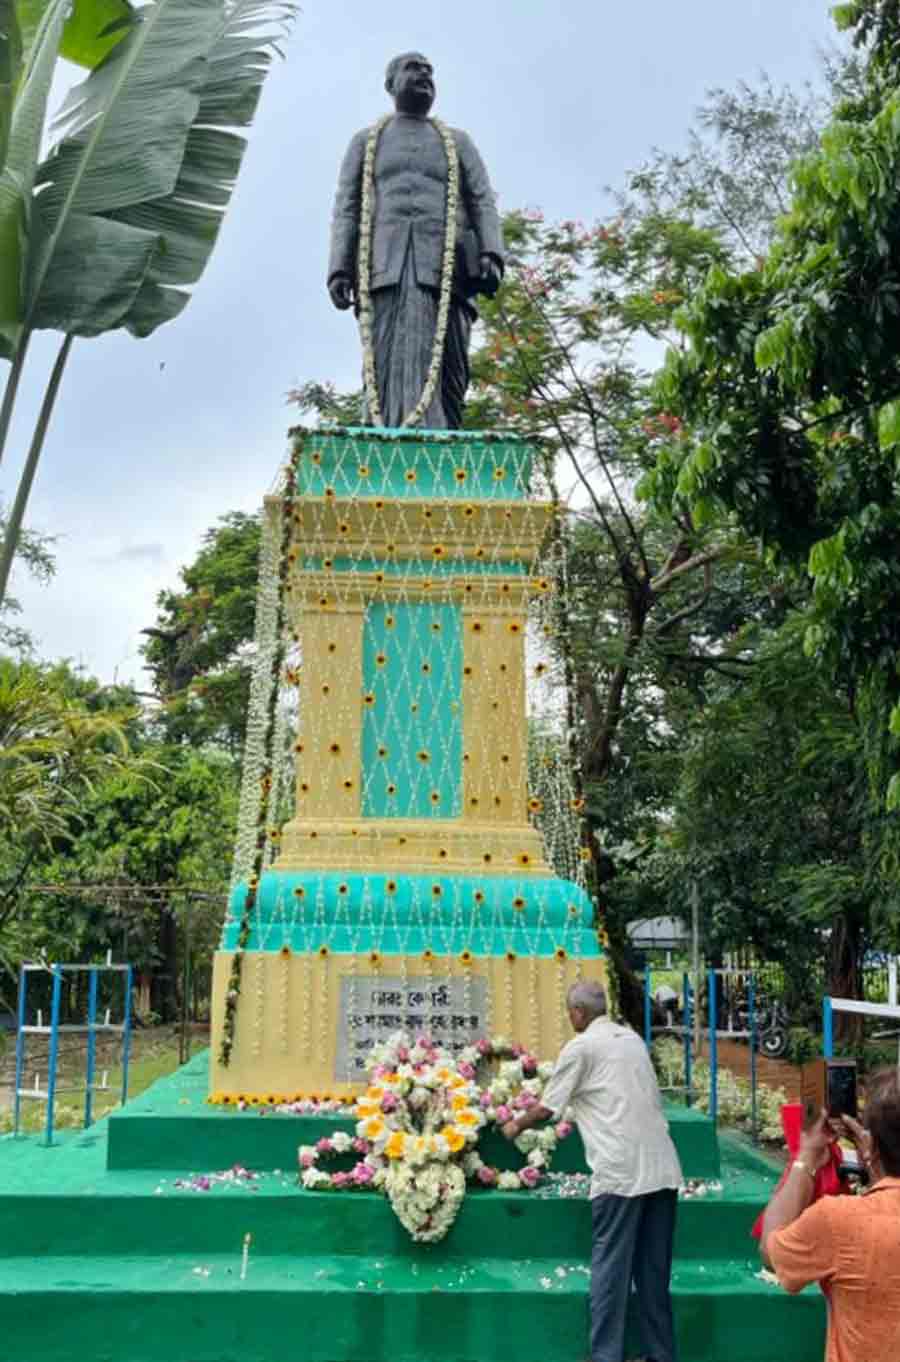 People from different walks of life paid homage to Syama Prasad Mookerjee on his 122nd birth anniversary. Mookerjee’s statue installed beside the BNR tent adjacent to Red Road was garlanded    